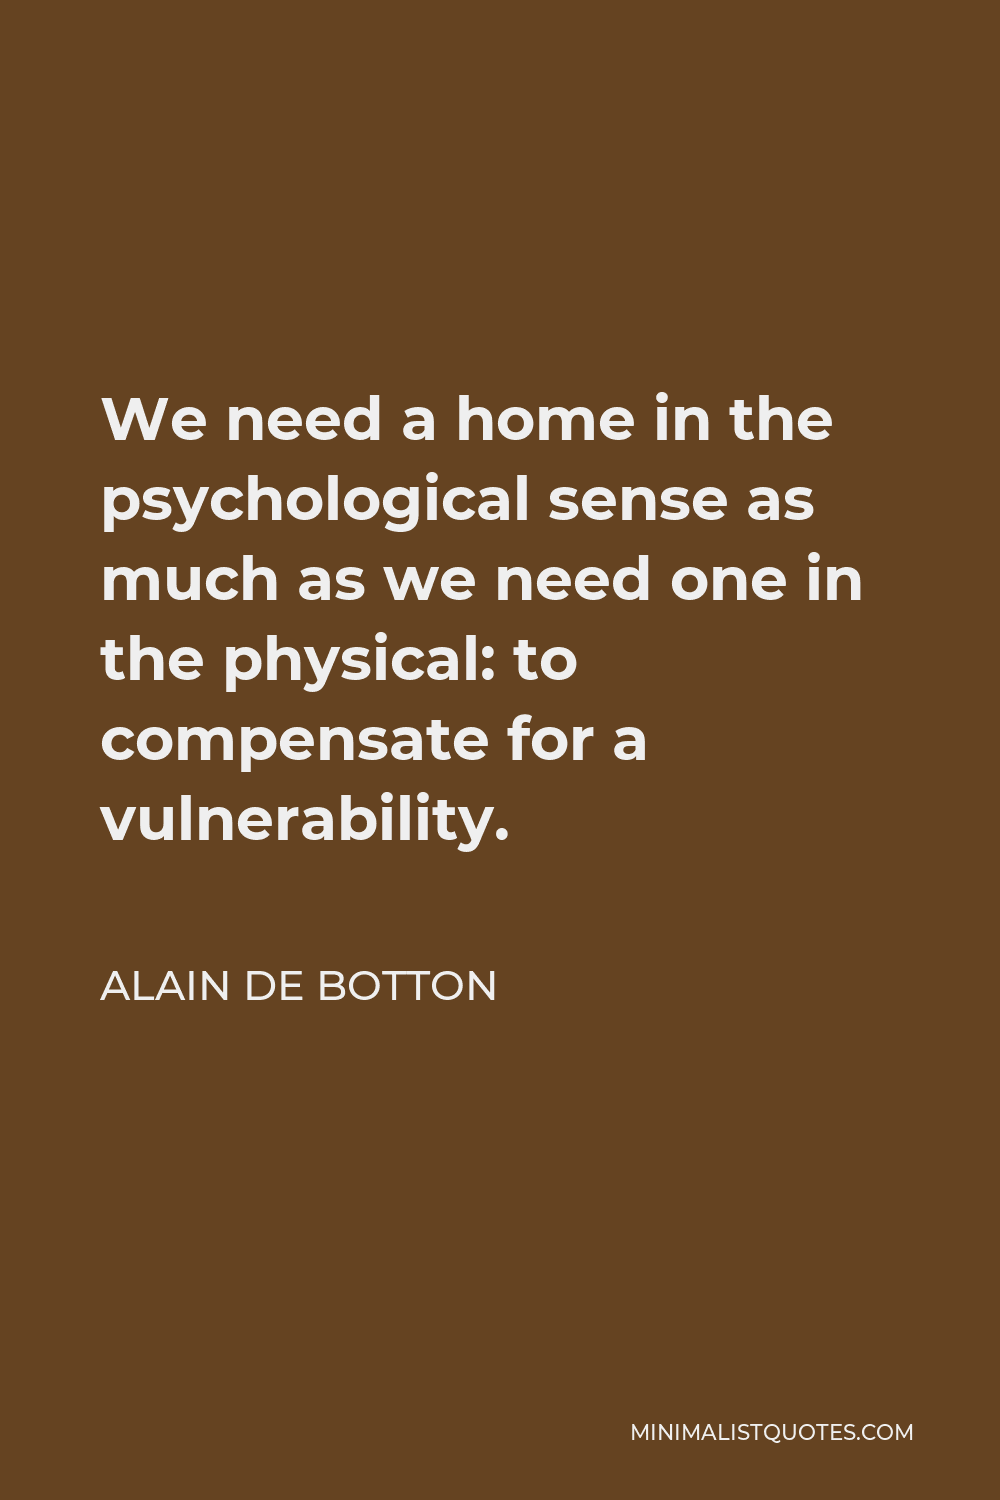 Alain de Botton Quote - We need a home in the psychological sense as much as we need one in the physical: to compensate for a vulnerability.